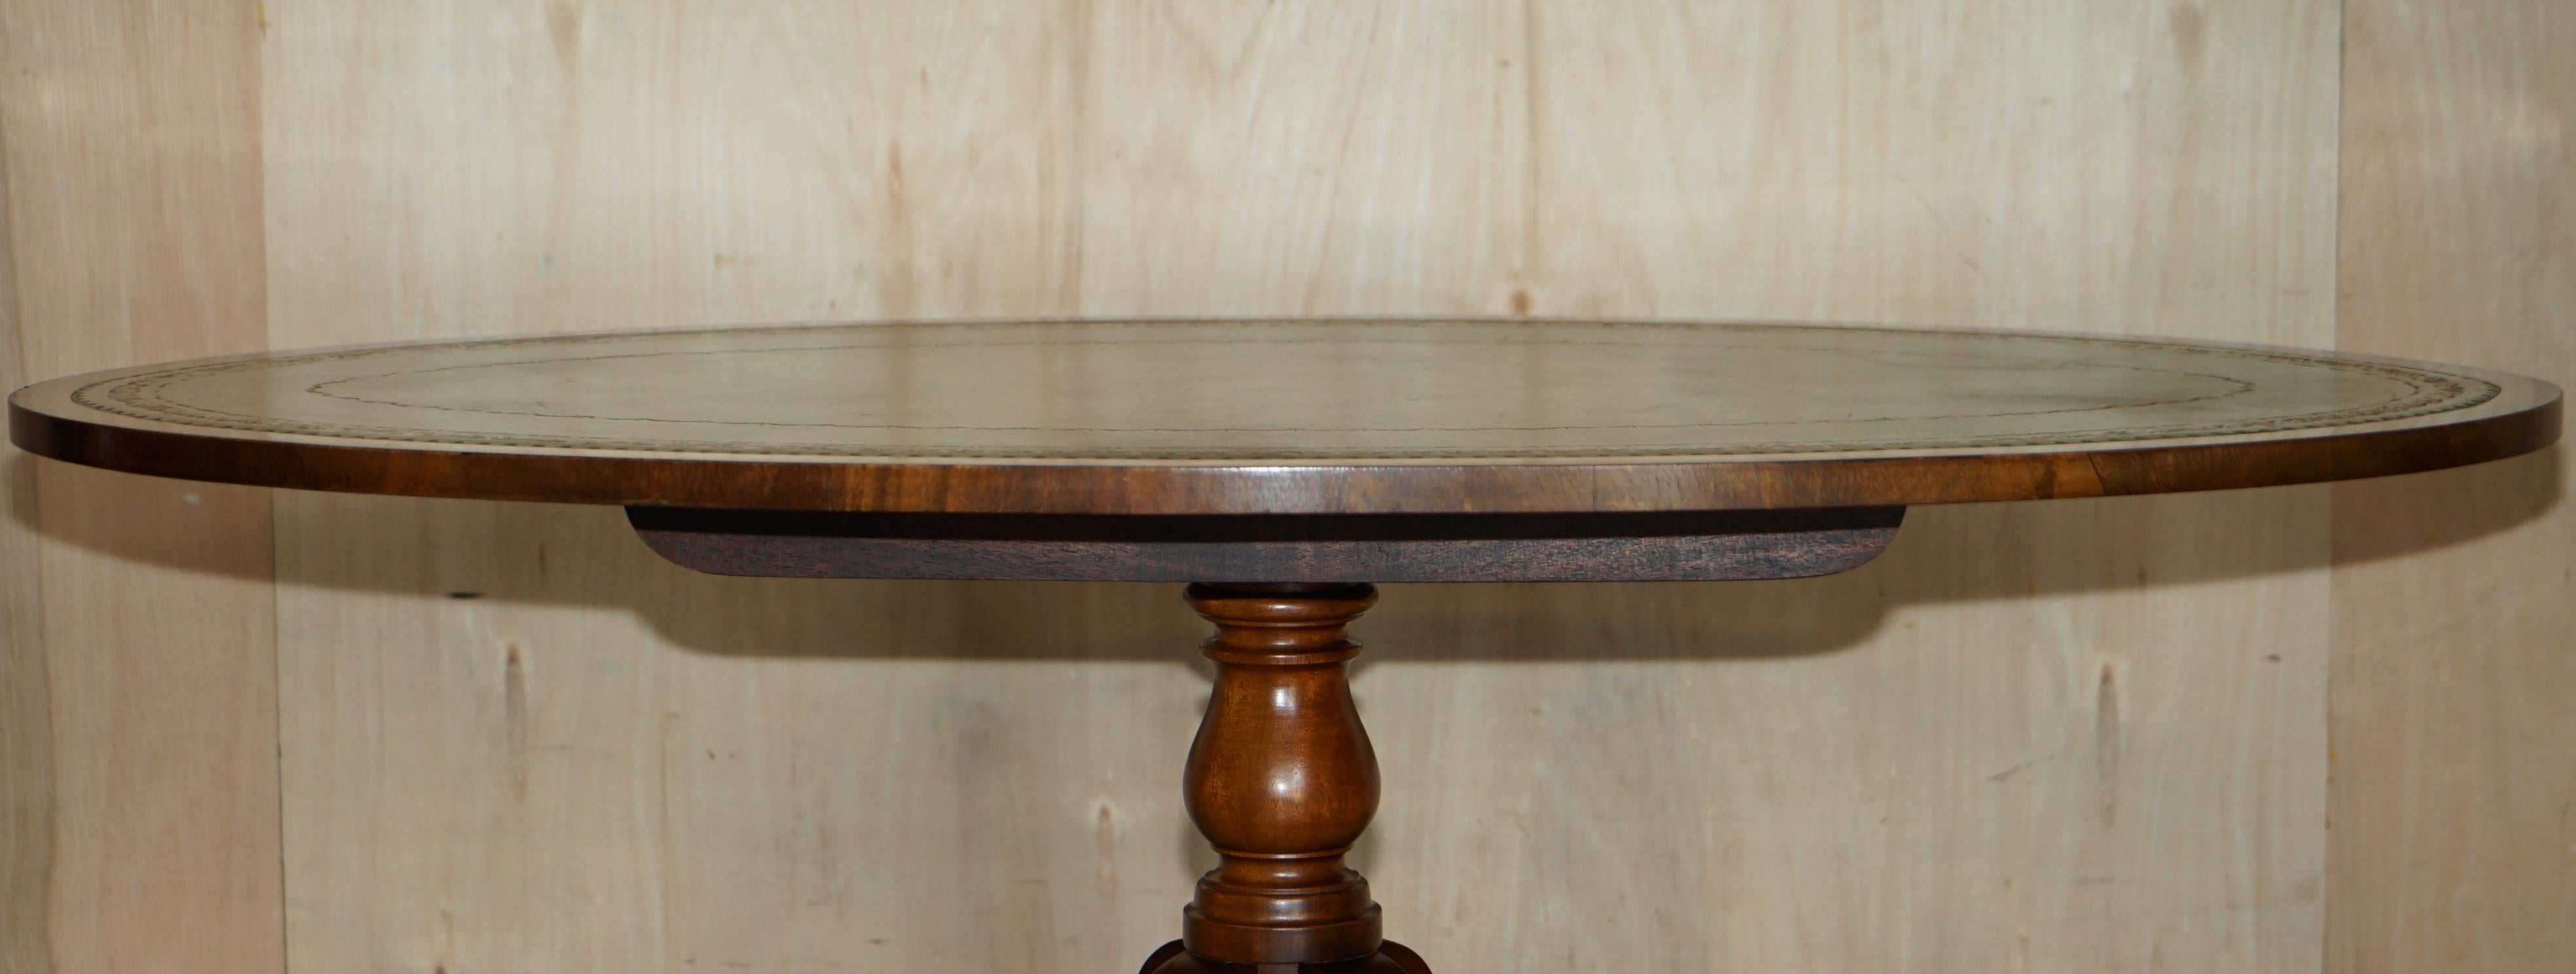 Late Victorian Stunning circa 1900 English Walnut Green Leather Brass Castor Oval Coffee Table For Sale